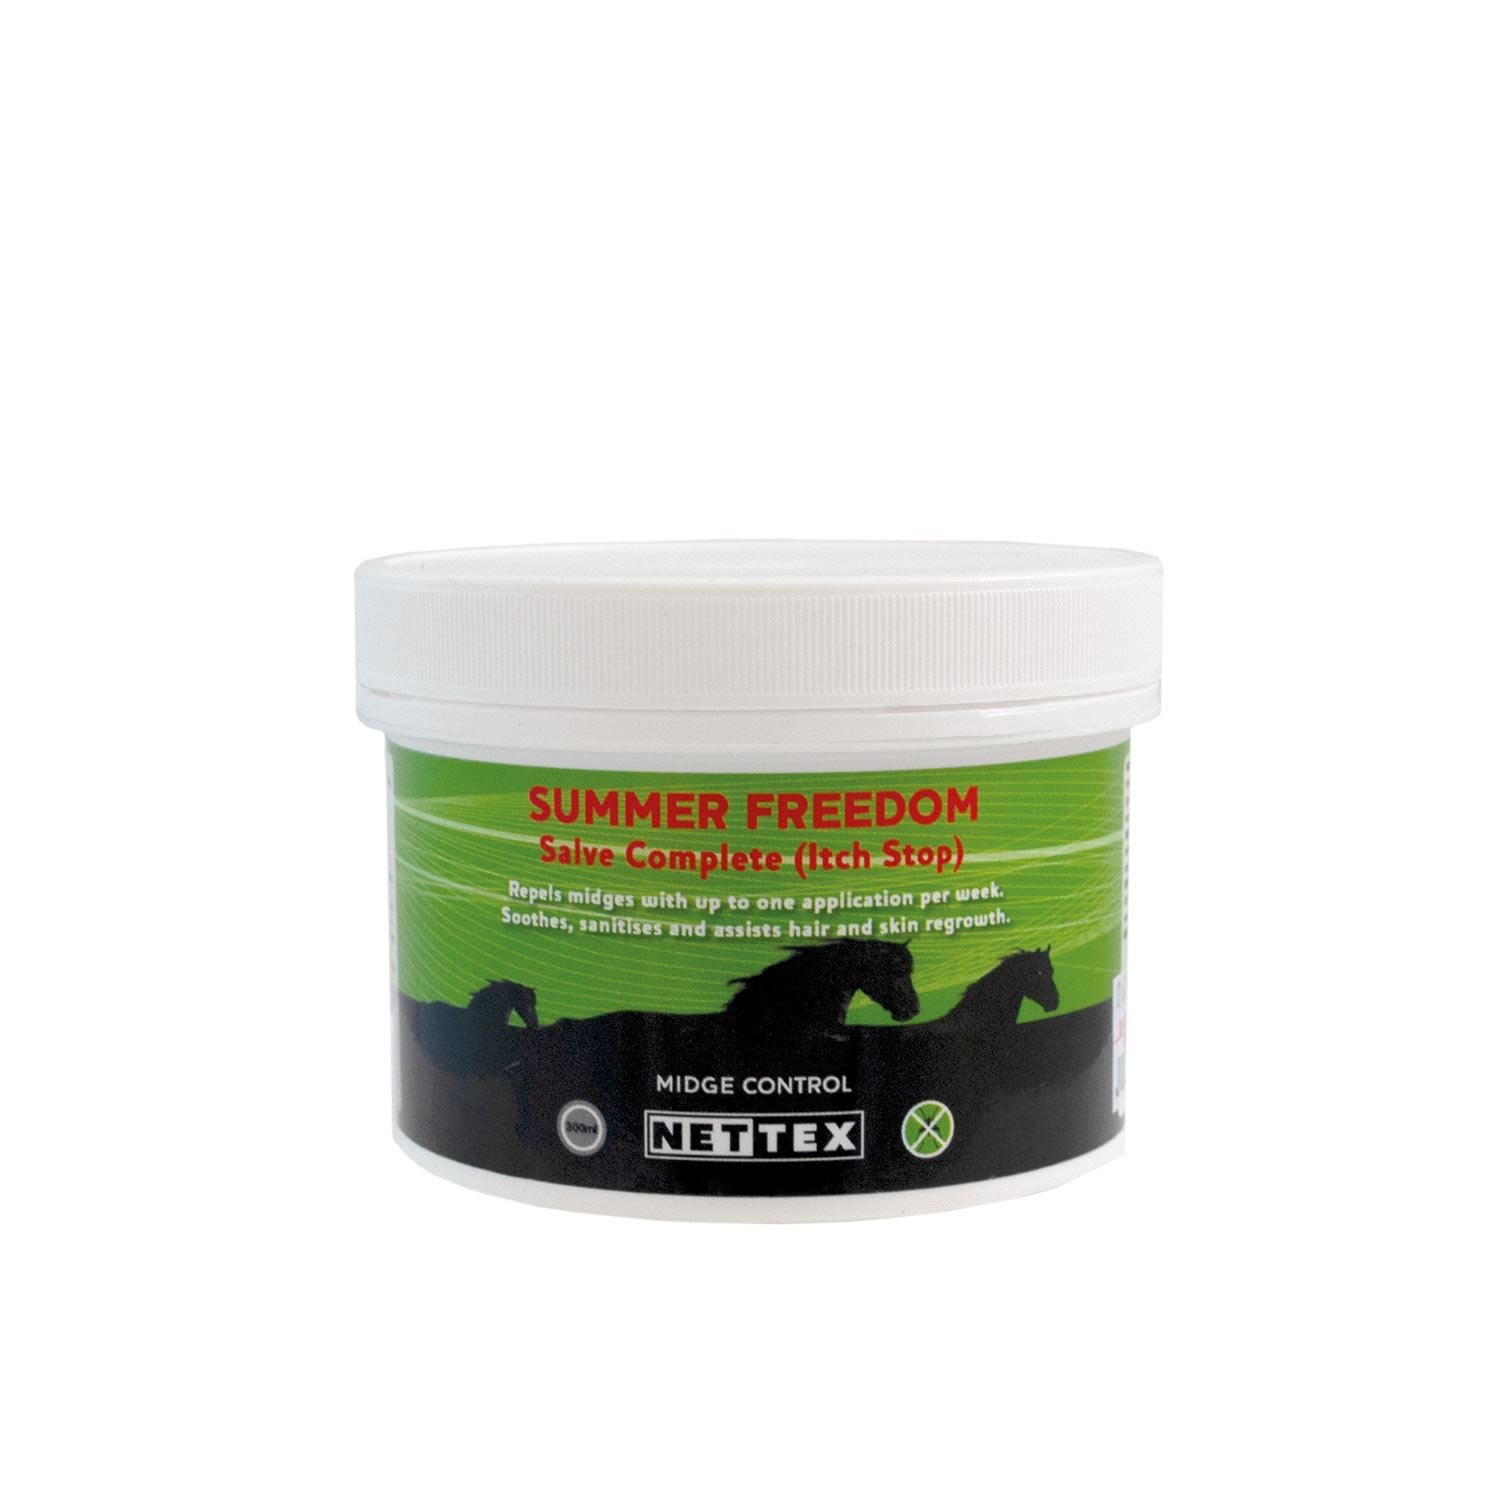 Nettex Summer Freedom Salve Complete - Just Horse Riders